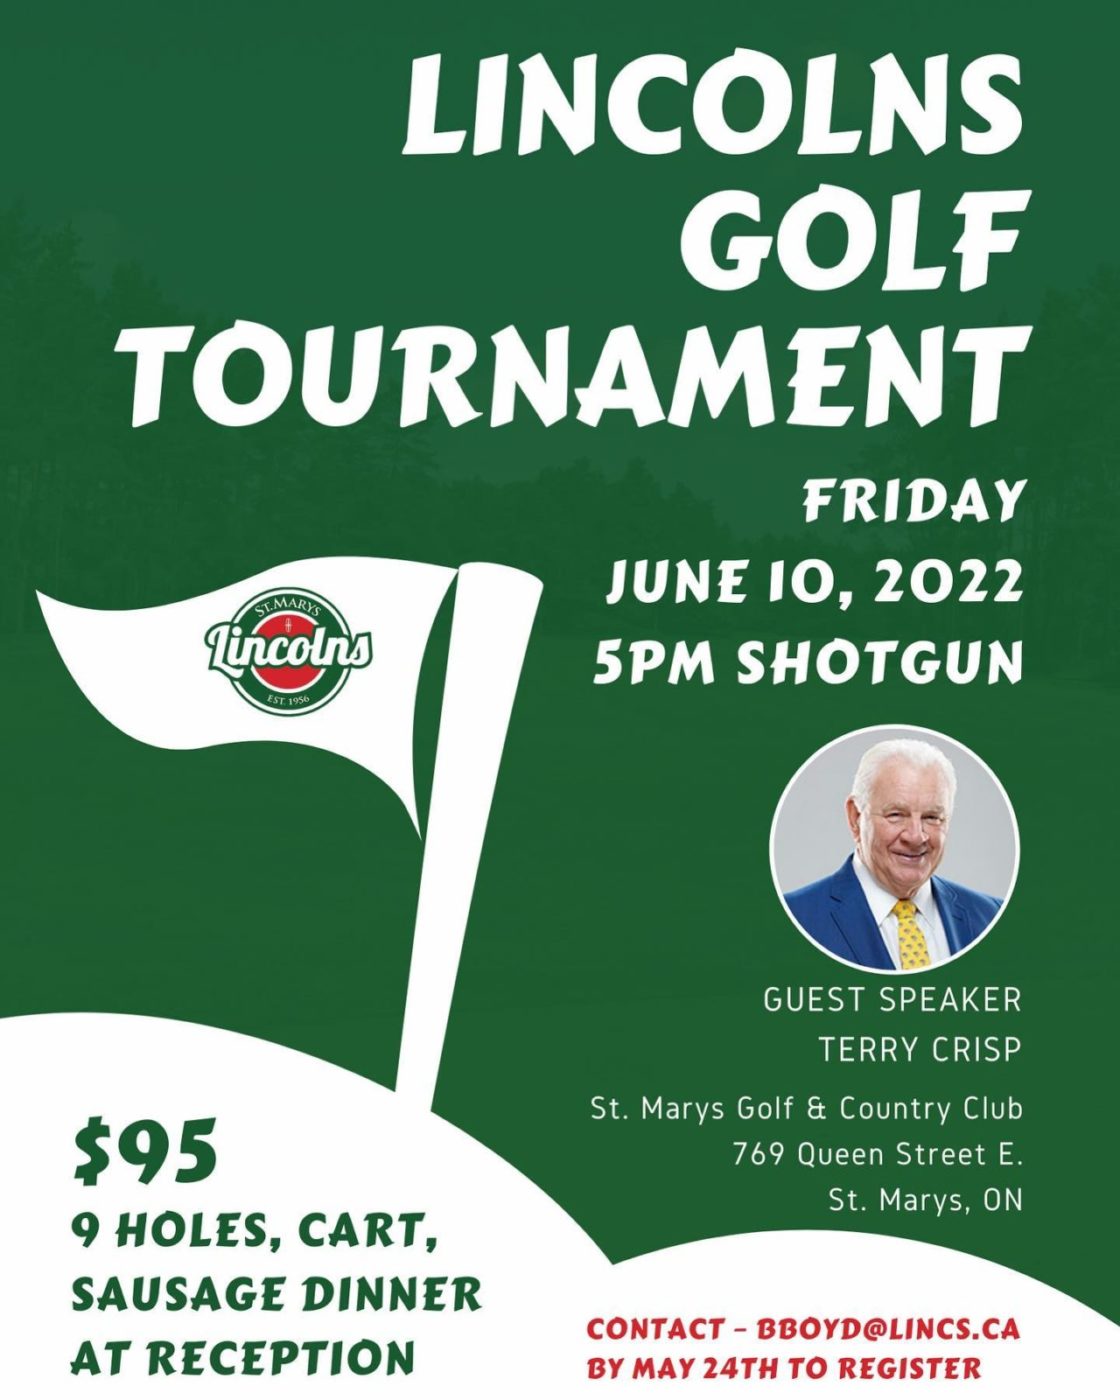 REGISTER TODAY - The annual Lincs Golf  Tournament is on Friday, June 10th with special Guest Speaker, Terry Crisp! This 9 hole event hosted by St. Marys Golf and Country Club starts at 5pm, followed by a reception in the Ballroom. With hole prizes, live auction and stories from NHL legend Terry Crisp, you won’t want to miss it! #WeAreLincolns @stmarysgolf